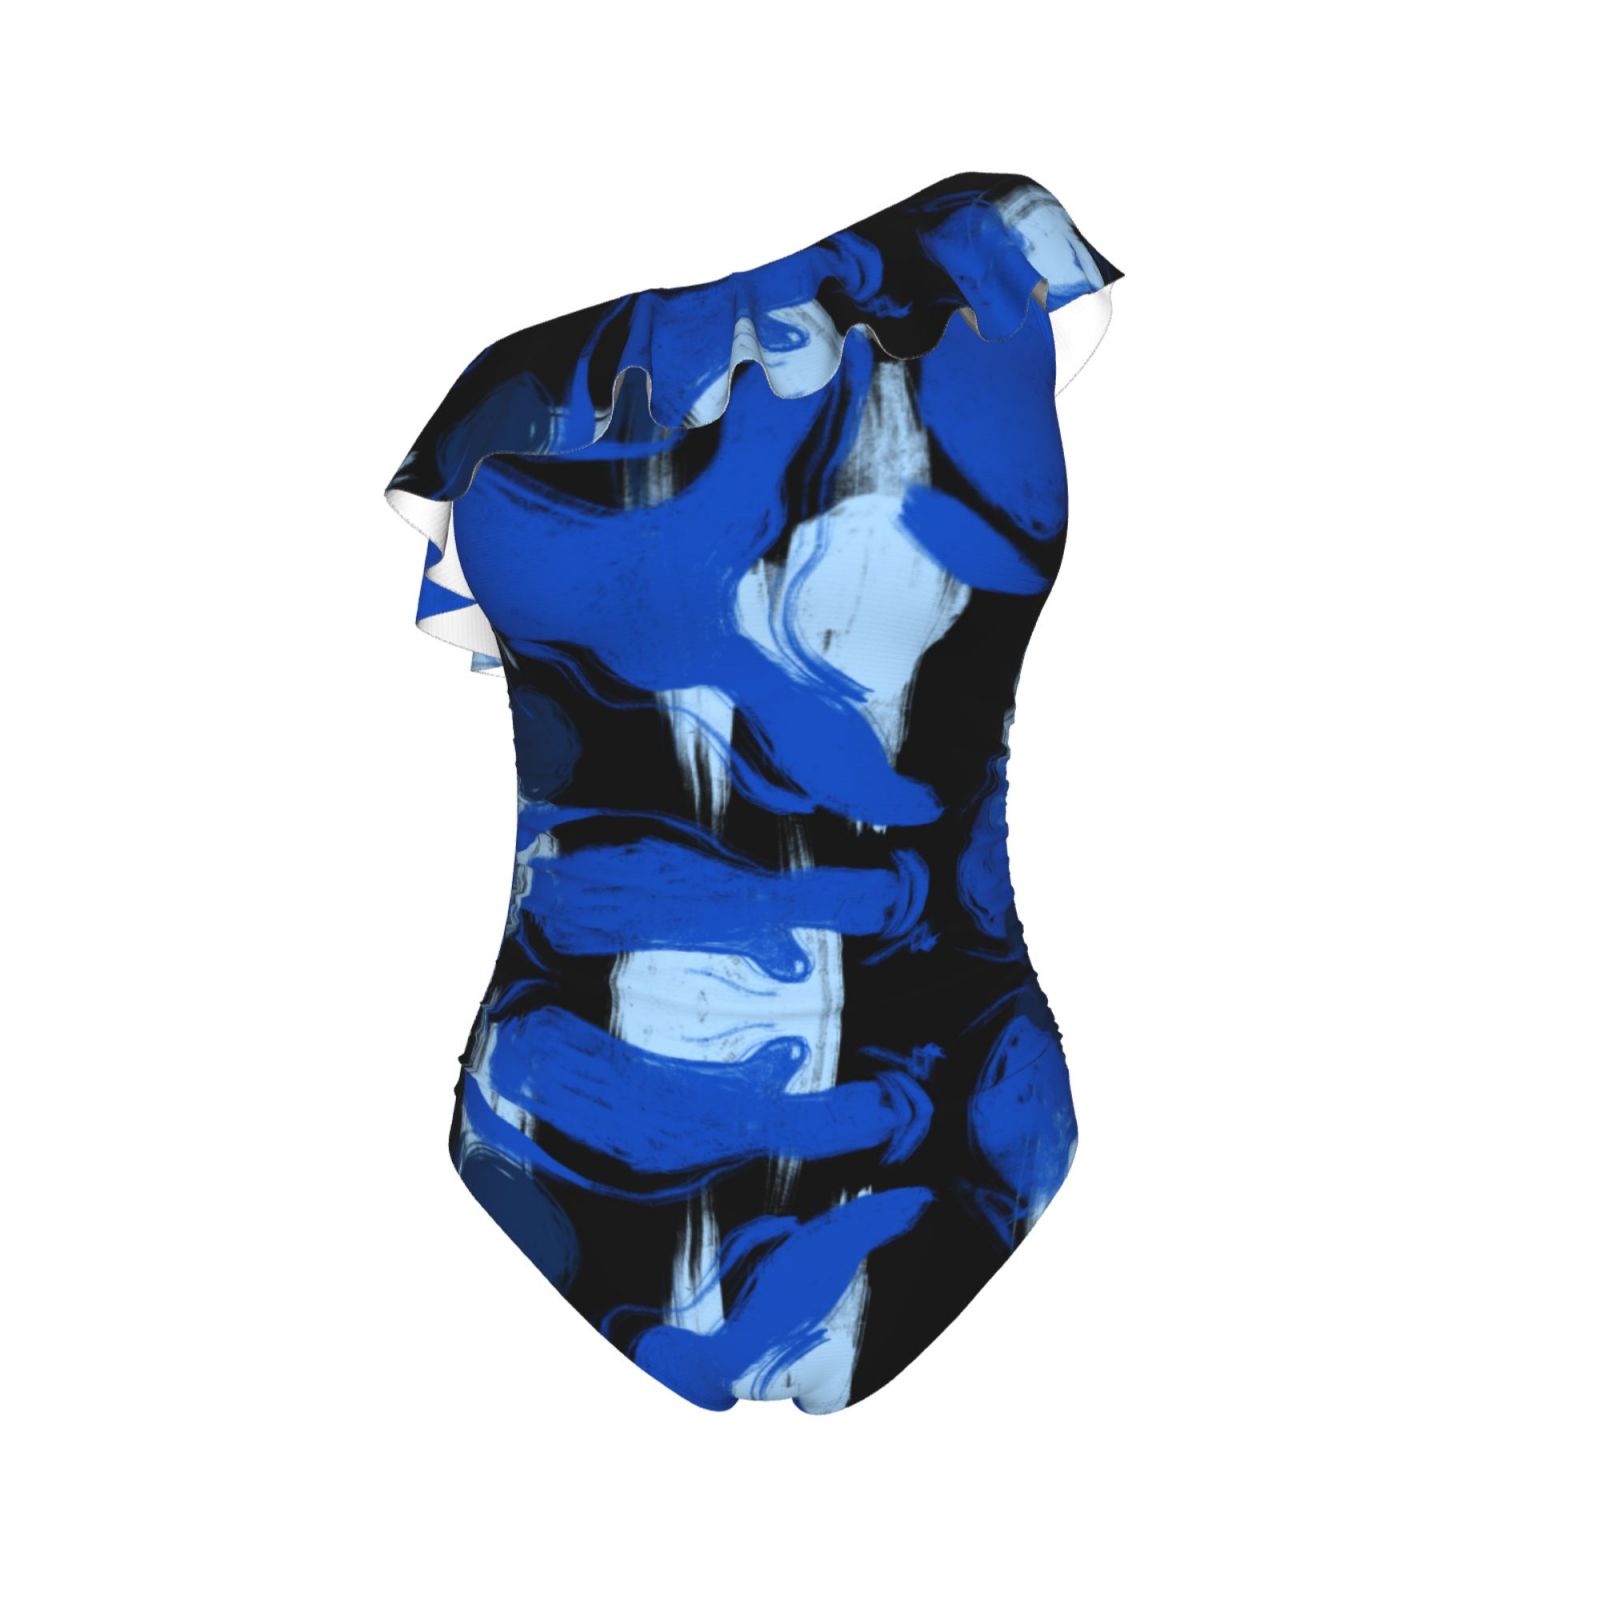 One Shoulder Ruffle Swimsuits